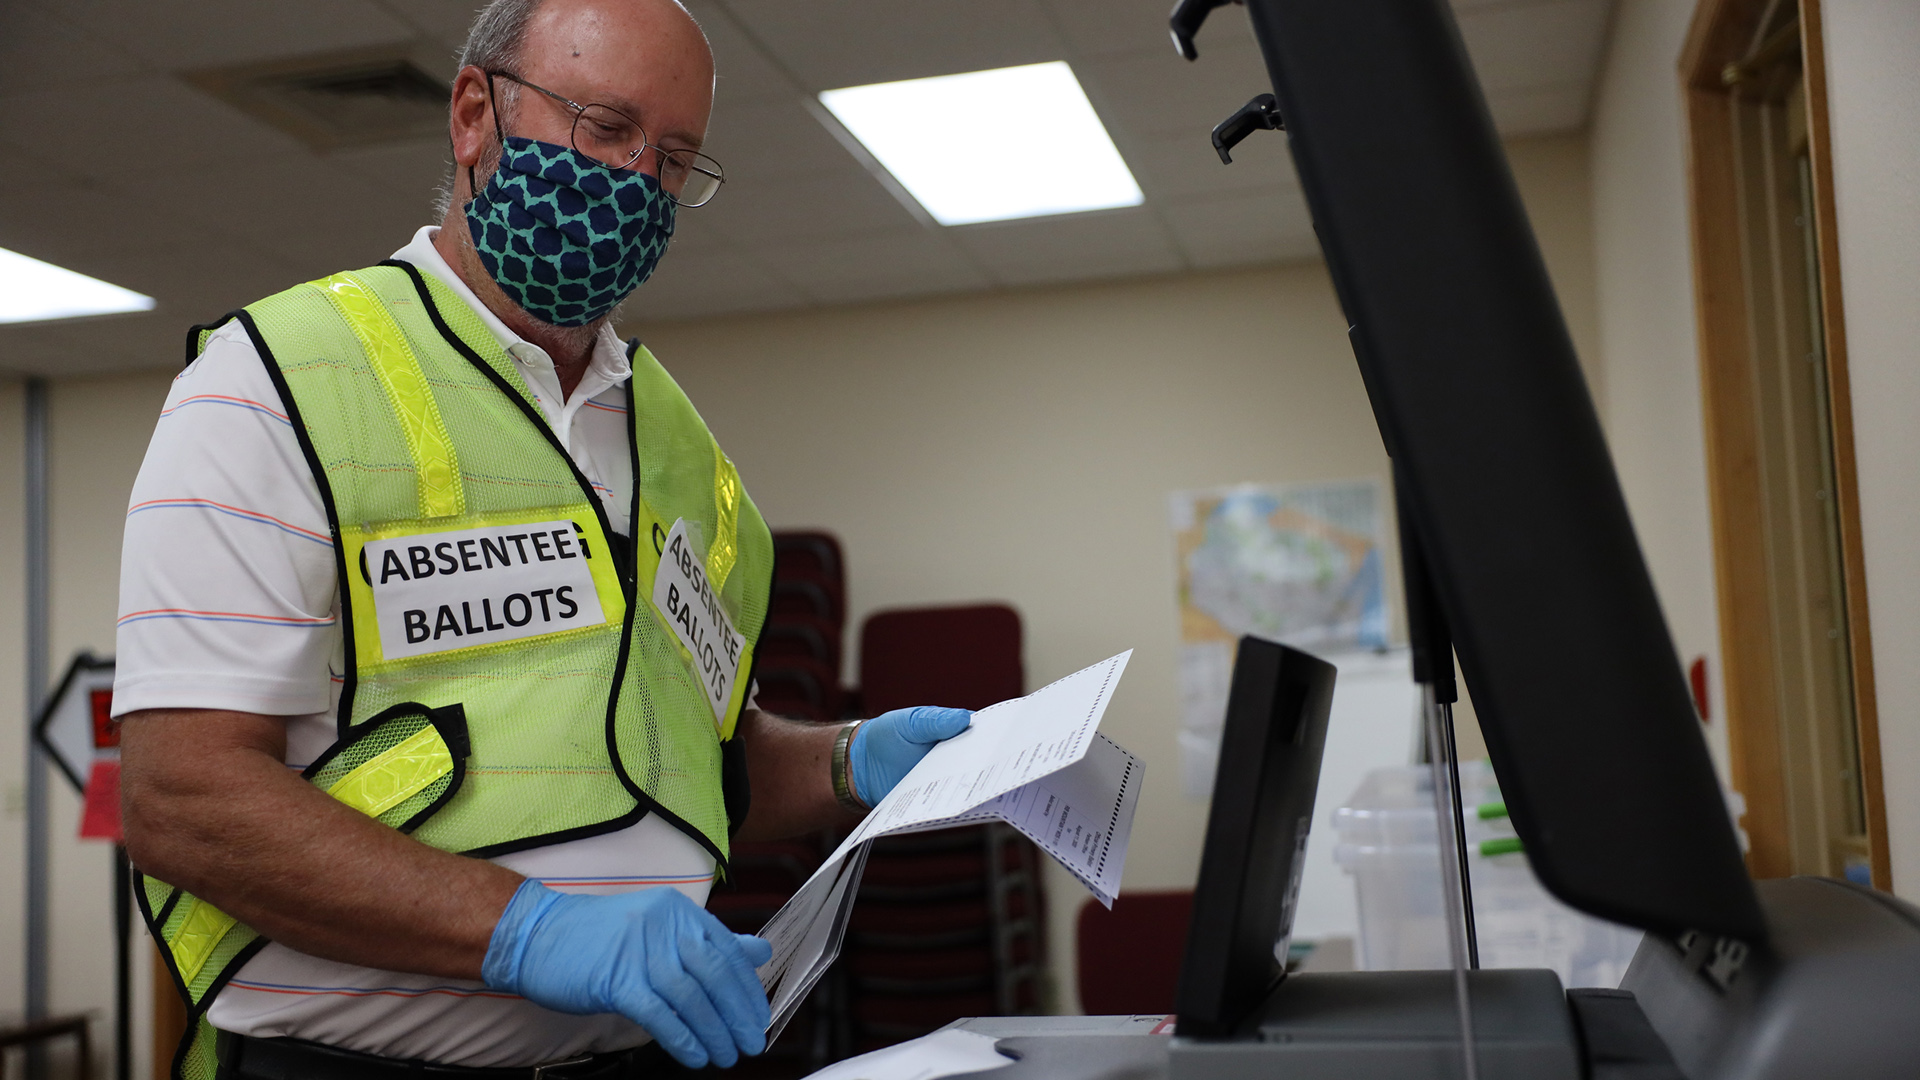 Mike Otten wears a high visibility safety vest with two labels reading "ABSENTEE BALLOTS" while holding several ballots in his left hand above a ballot tabulation machine in an office.